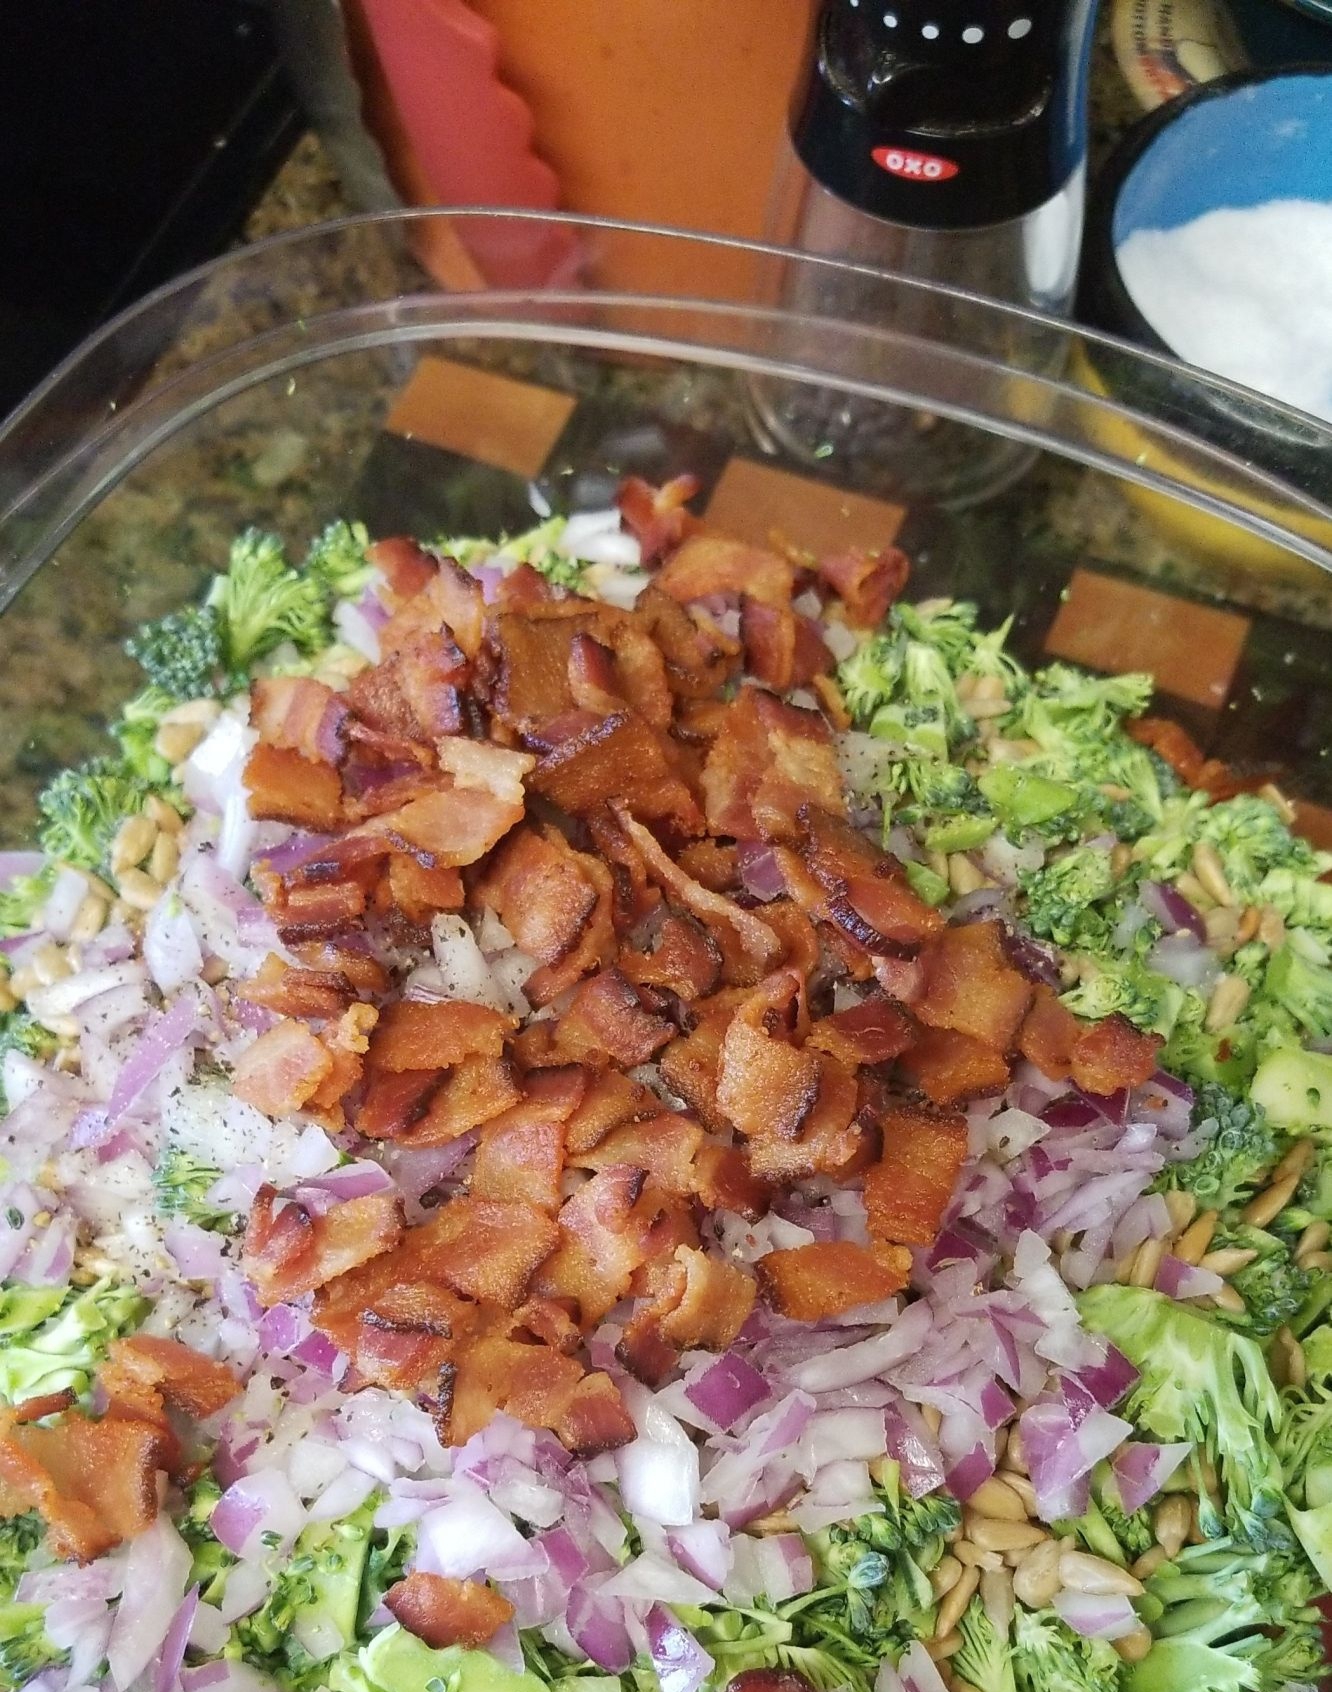 Broccoli Salad with Bacon Issaarnold